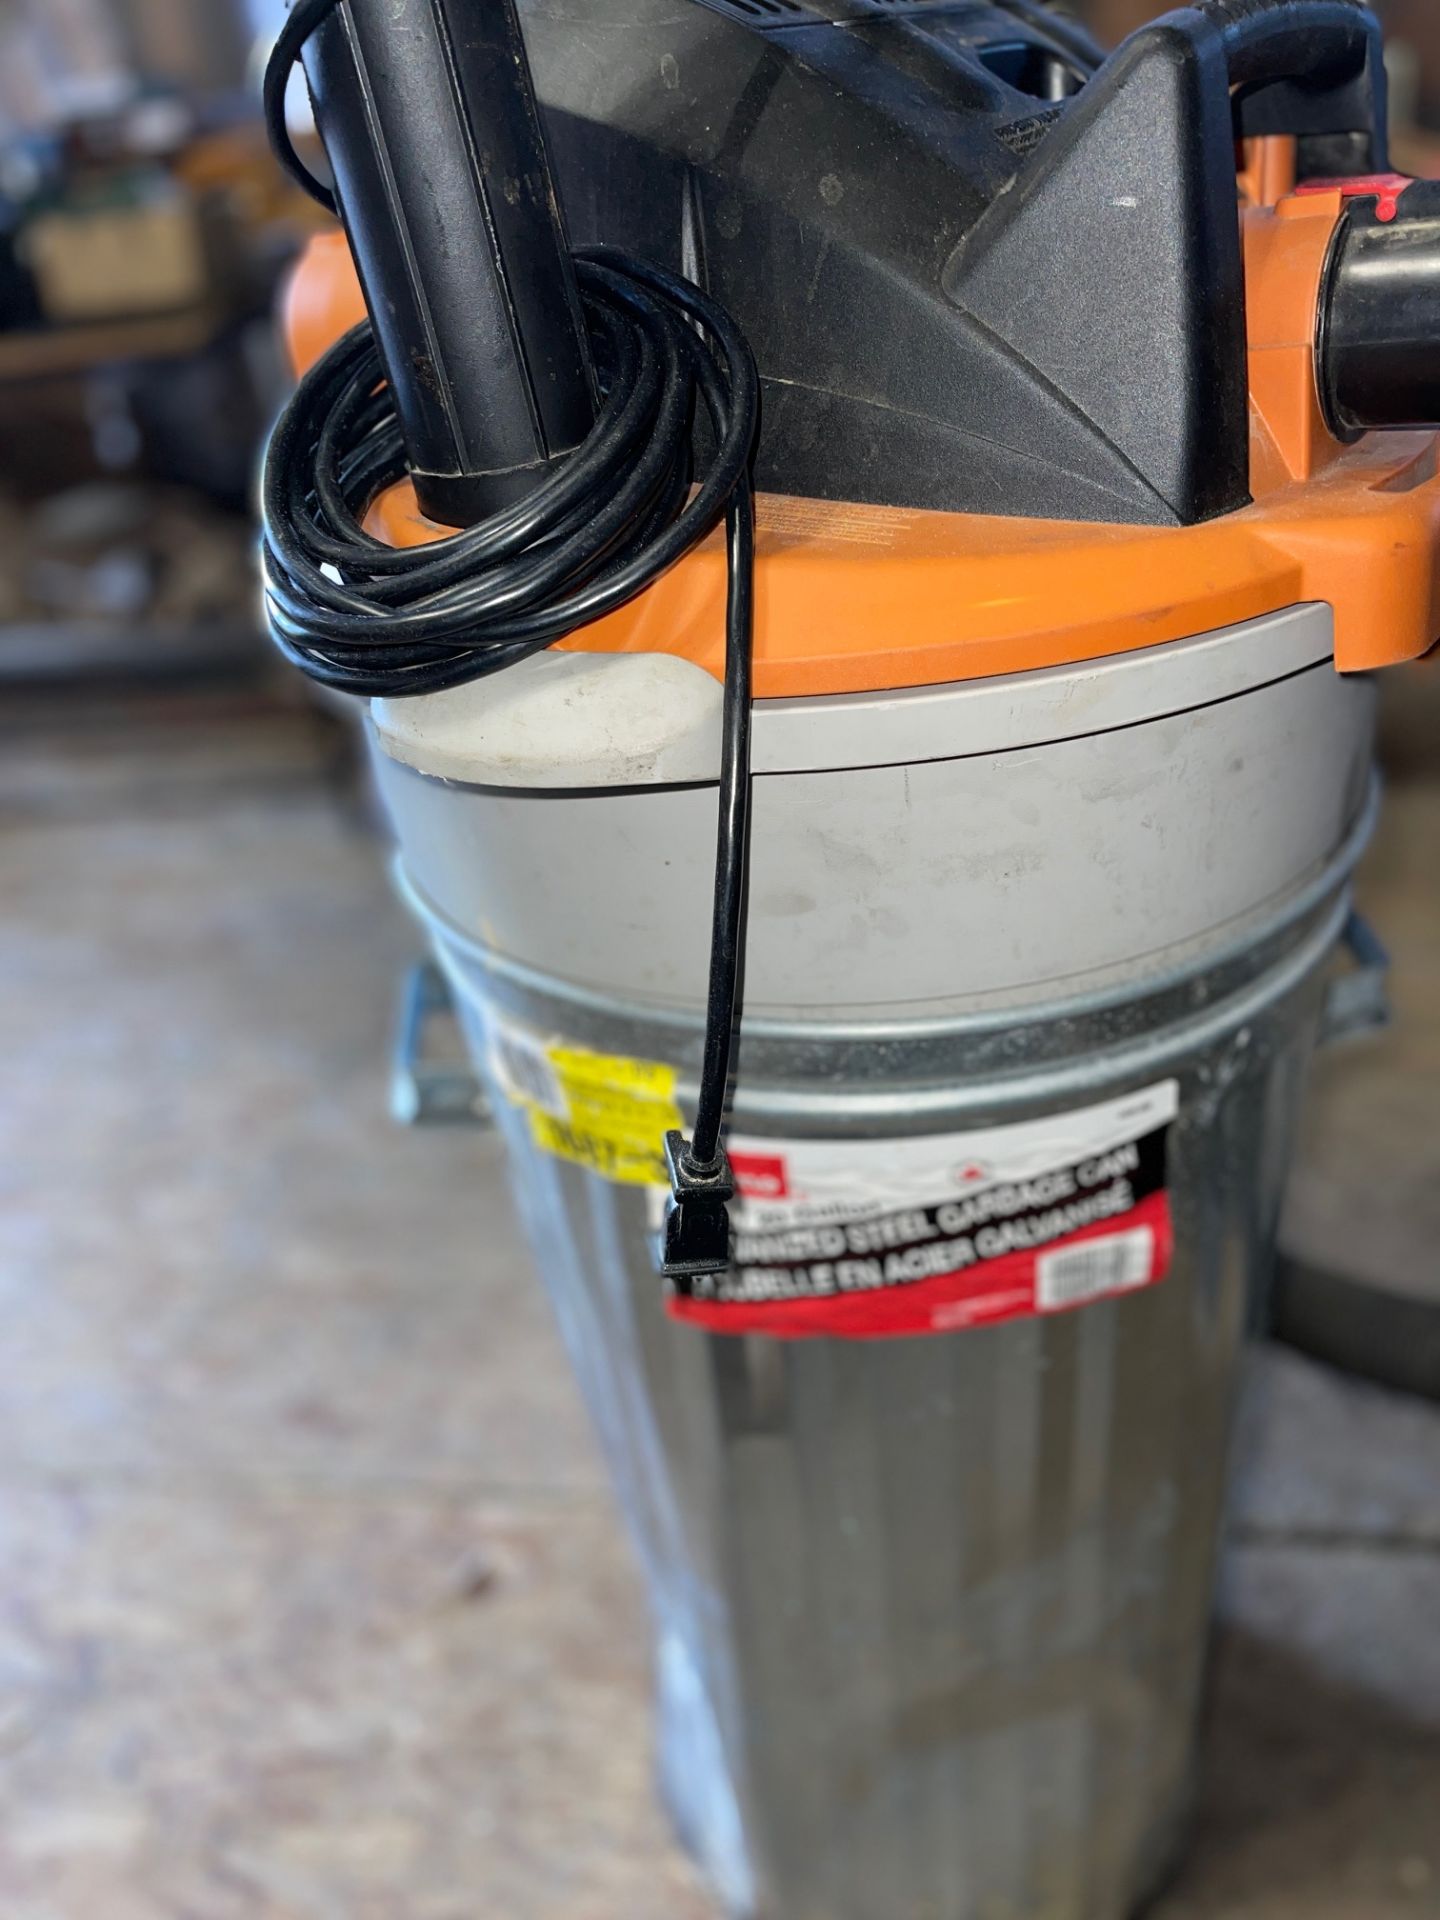 VACCUM CLEANER SHOP VAC, 20 GALLON 5.0 HP WITH GALVANIZED STEEL GARBAGE CAN - Image 2 of 3